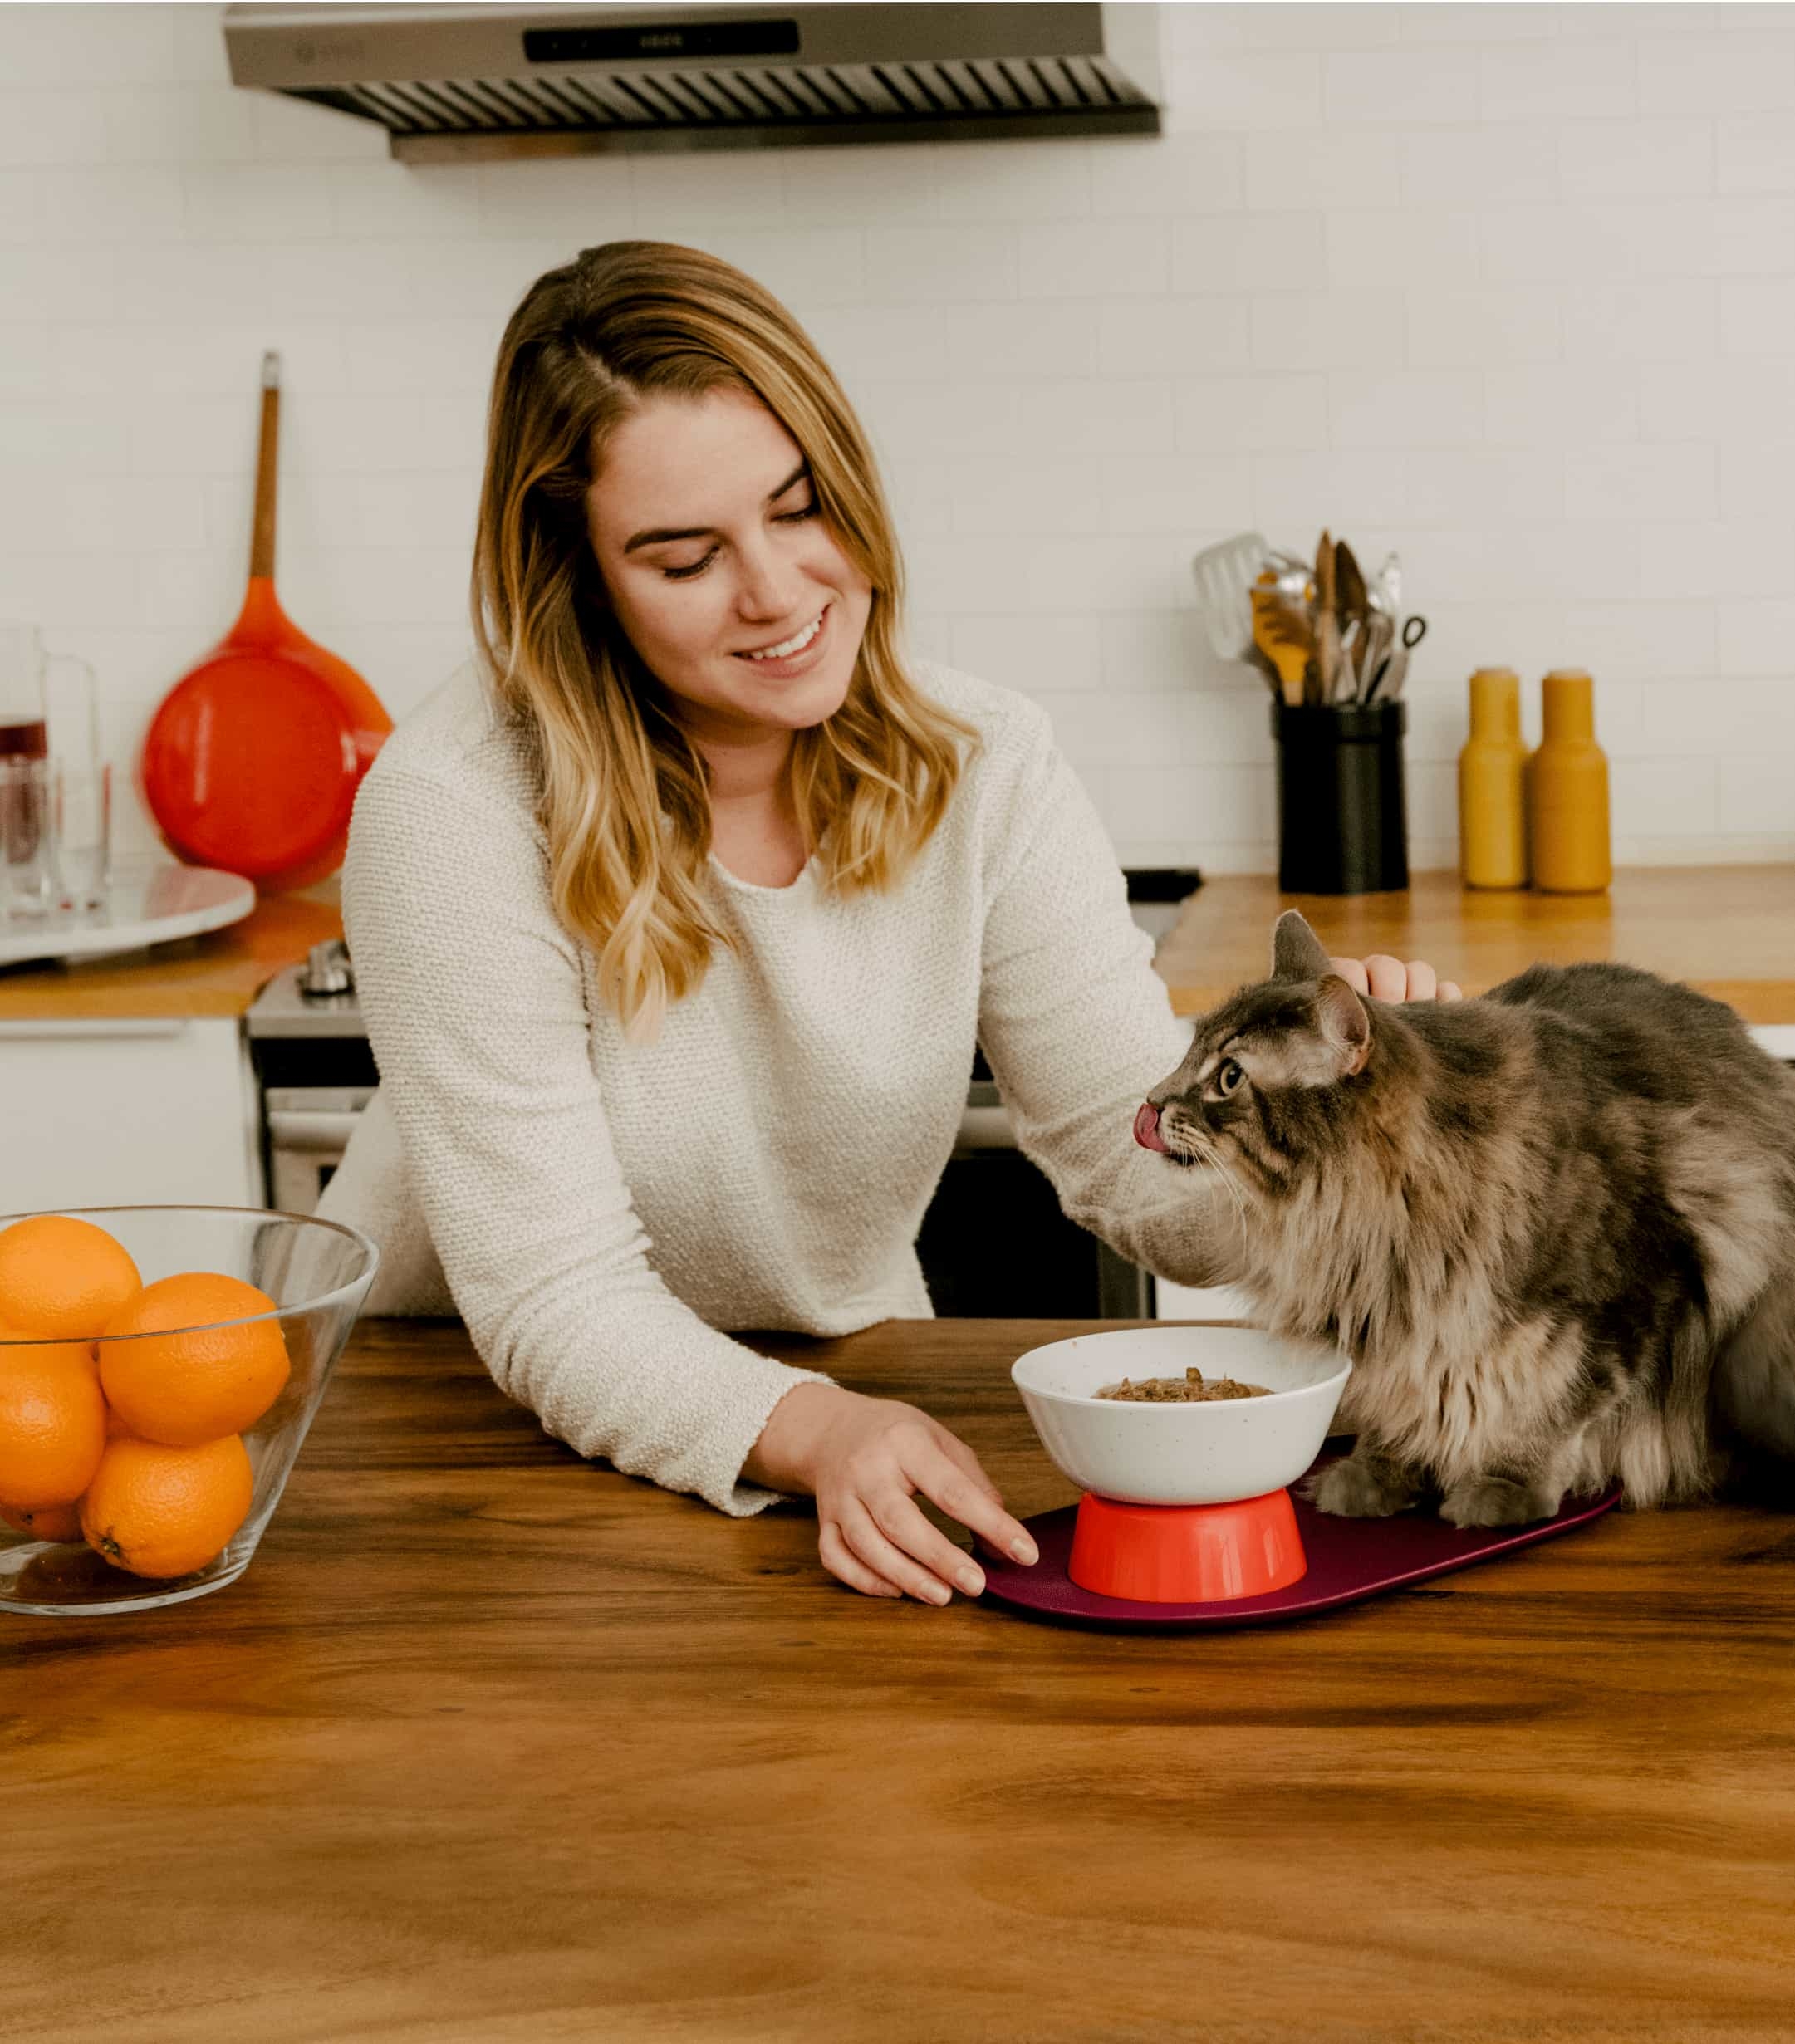 Smiling woman petting cat eating wet food from Cat Person Mesa Bowl on kitchen counter